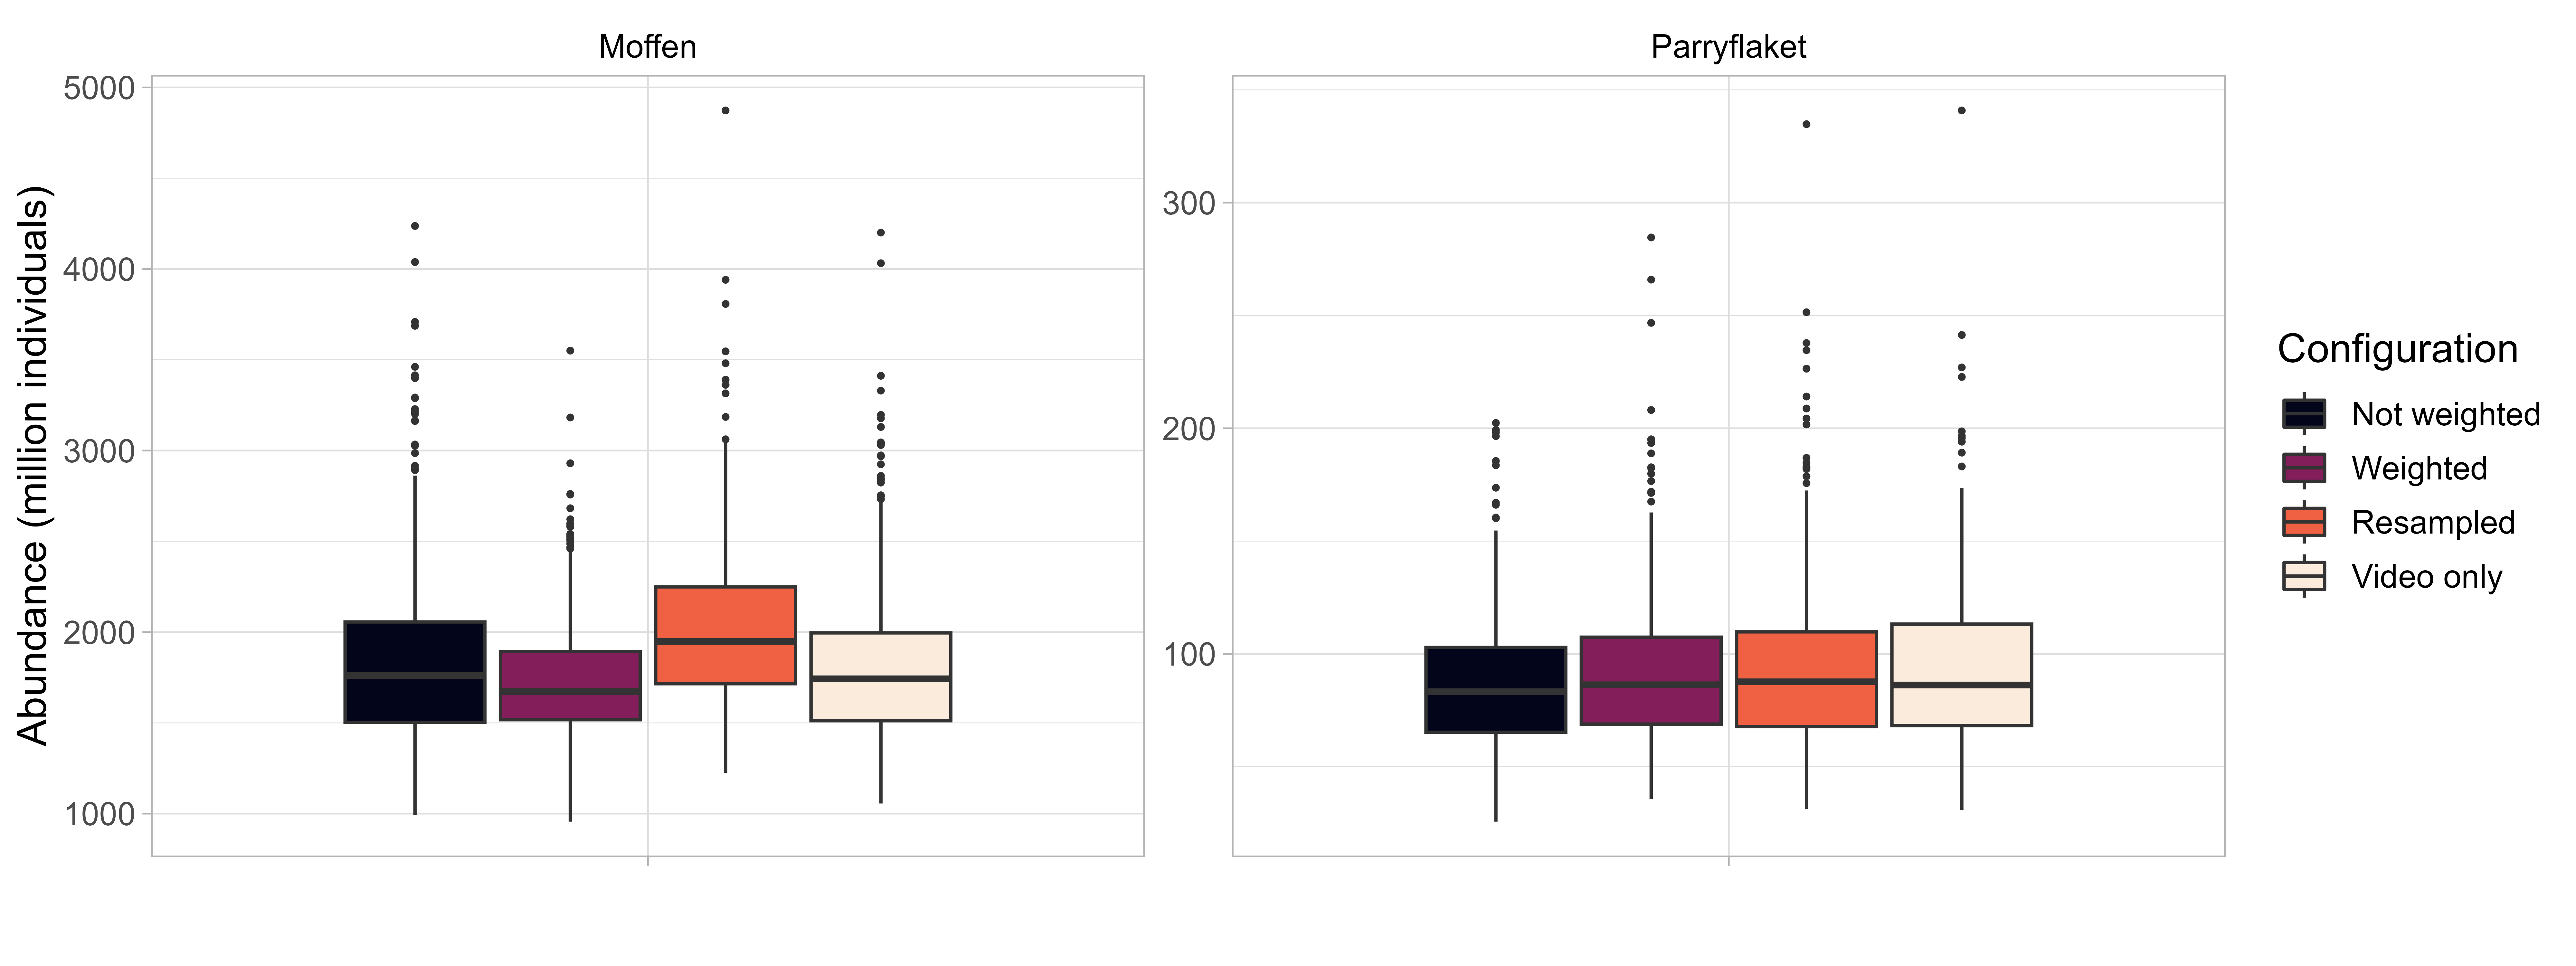 Estimated scallop abundance on Moffen and Parryflaket beds outside of protected areas. Shown are boxplots of estimated abundance based on 1000 iterations of four different GAMM configurations: 1) using video and dredge data combined (unweighted), 2) video and dredge data weighted with the number of images per station (dredge fixed to 0.5), 3) video and dredge data weighted, with video counts resampled from the estimated count distributions, and 4) video data only as the baseline used in Stokkeland (2023). Each iteration represents a simulated density across the integration grid based on means and standard errors estimated with the spatial GAMM, raised to the selected areas to calculate total abundance. For resampled abundance estimated, the spatial GAMM was re-fitted in each iteration to the resampled count data. Boxplots show median (solid lines), 25% and 75% percentiles (boxes), 1.5 interquartile range (whiskers), and outliers (dots).